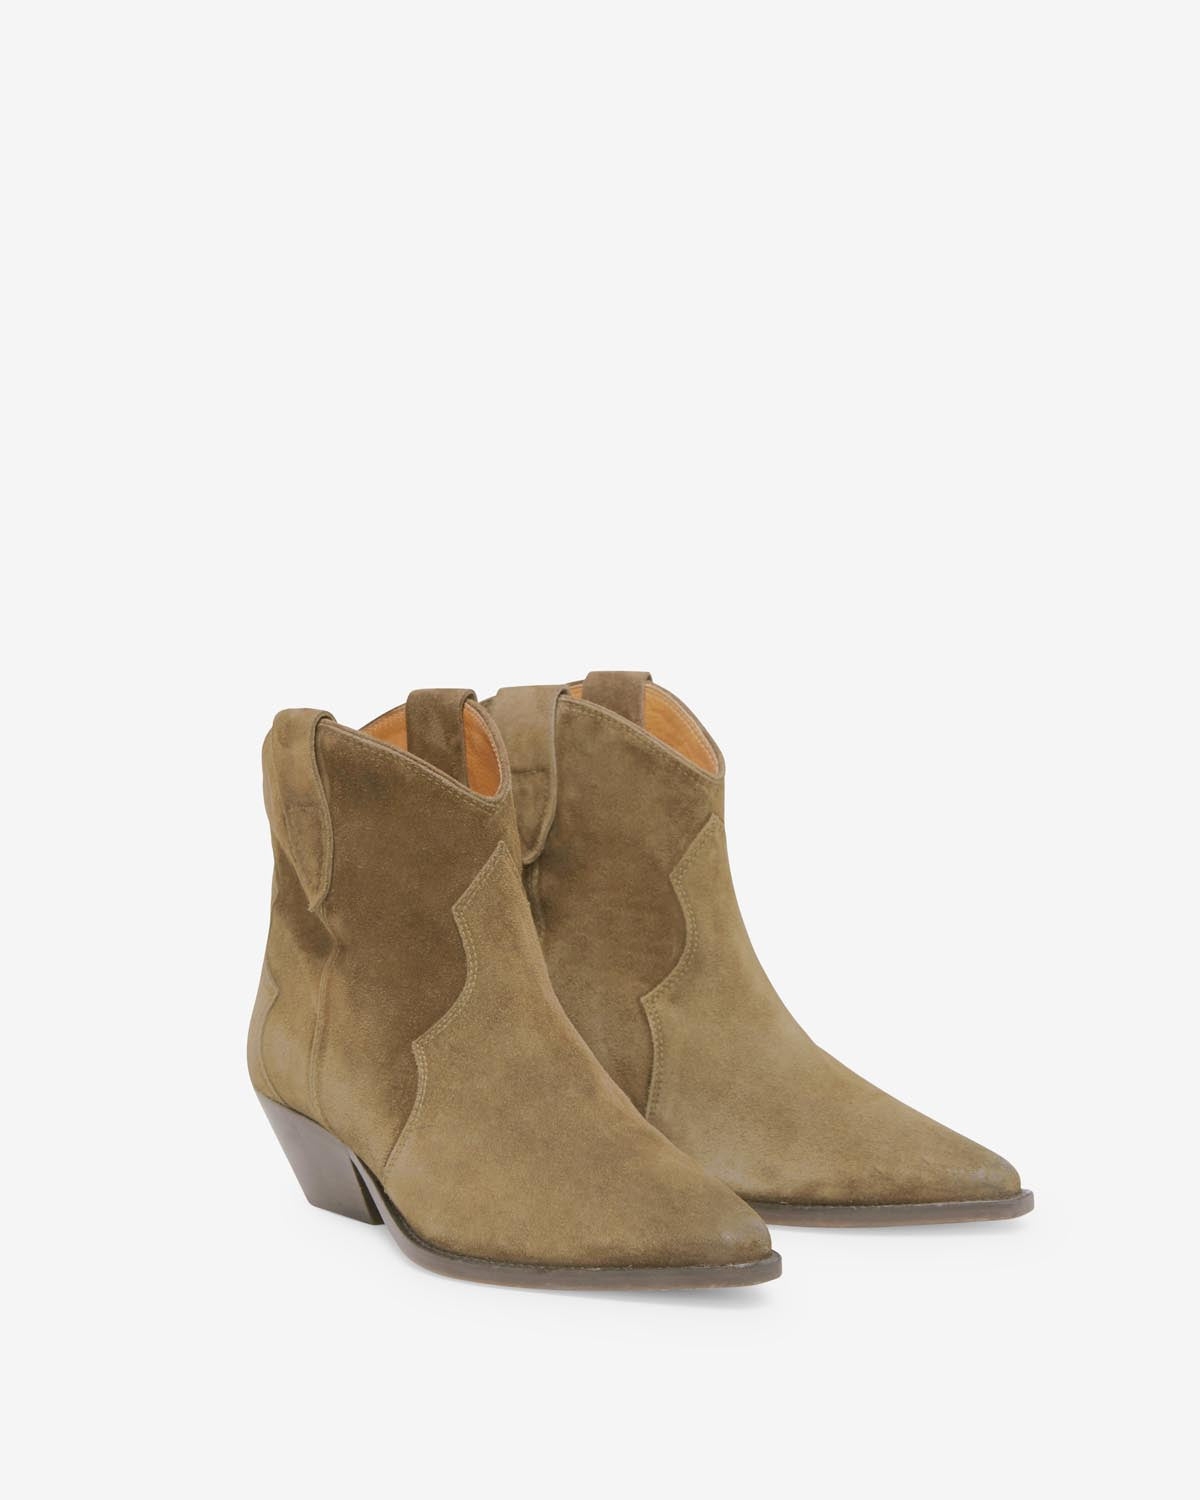 Boots dewina Woman Taupe 4